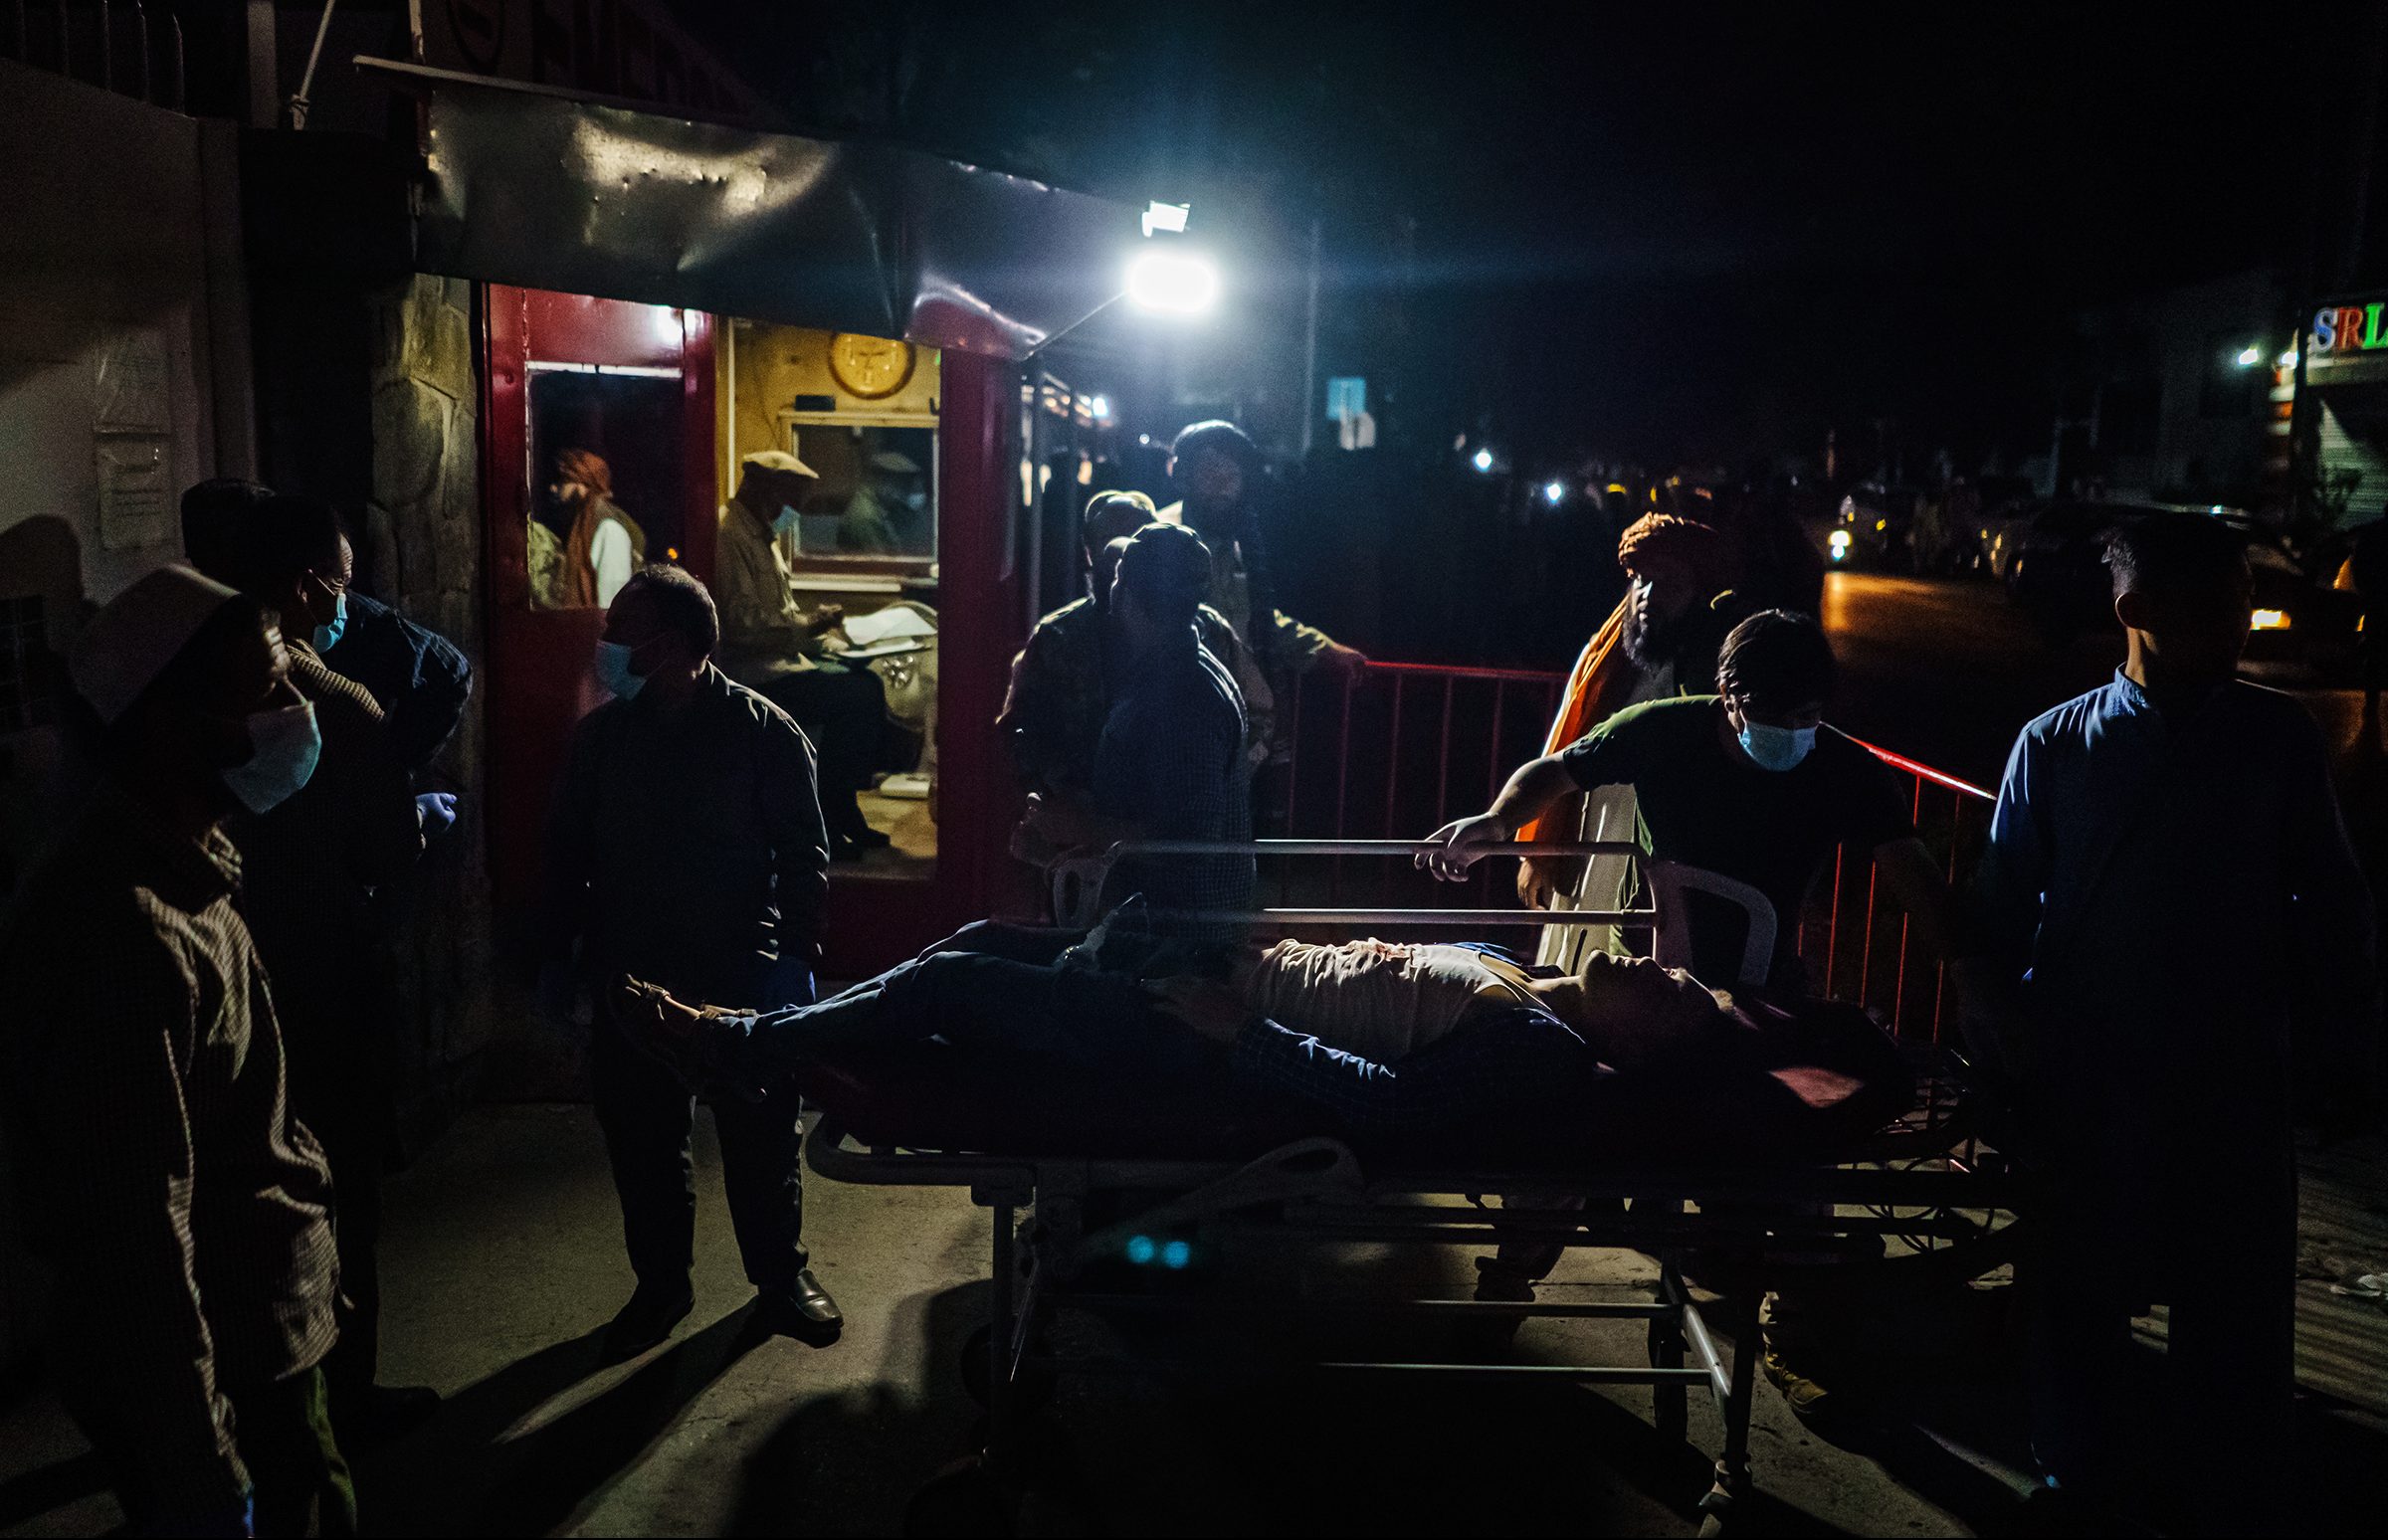 Hospital staff help bring in a wounded patient brought by an ambulance at an emergency hospital in Kabul, Aug. 26. Twin bombings struck near the entrance to Kabul's airport on Thursday. (Marcus Yam—Los Angeles Times/Getty Images)